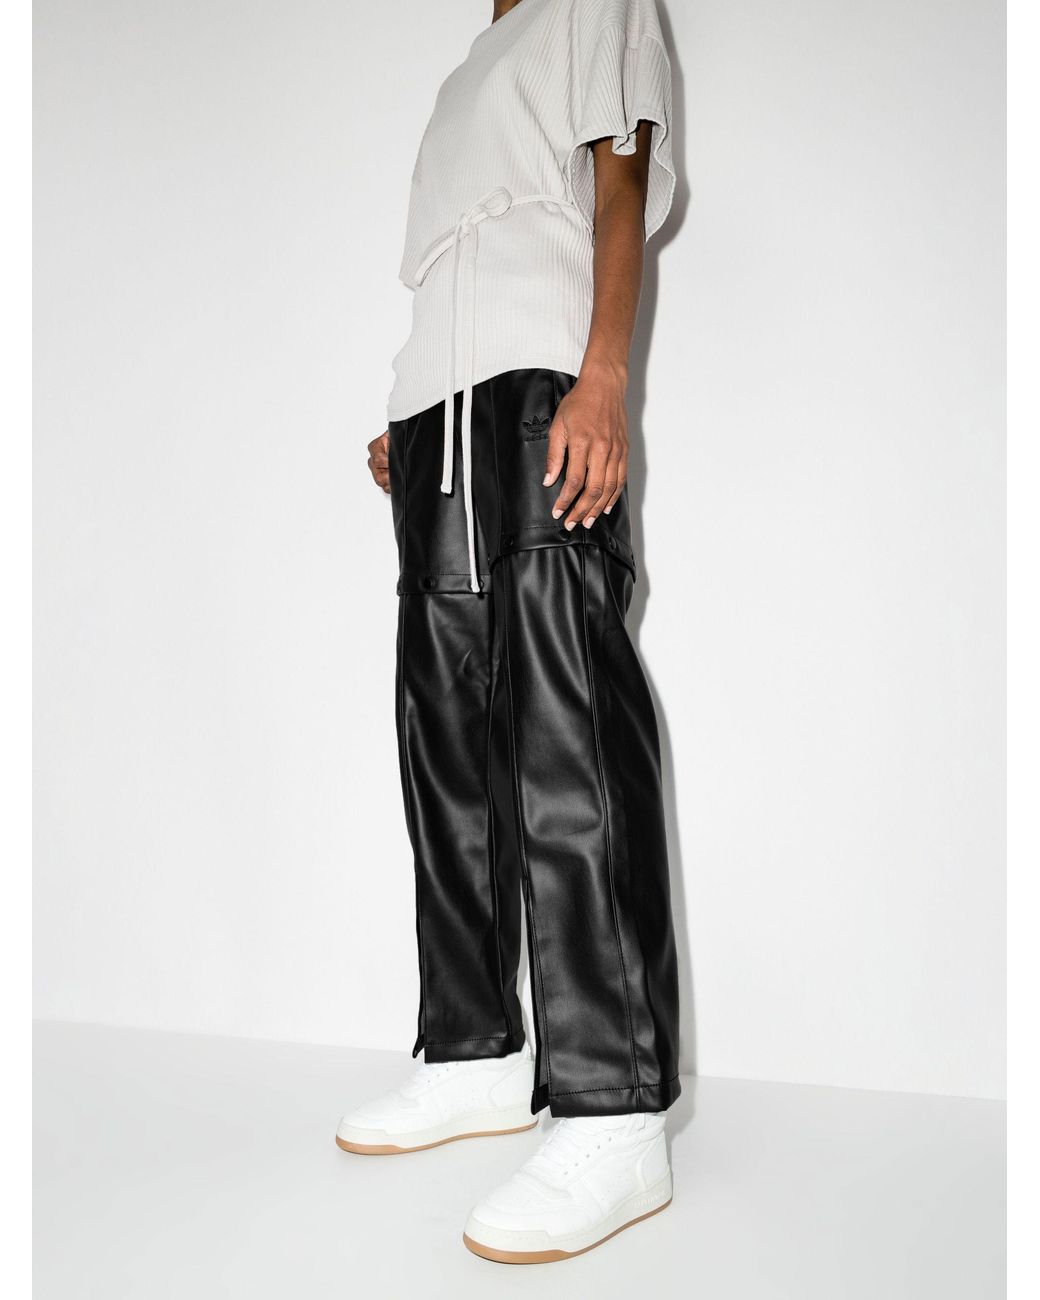 kinema synthetic leather track pants M